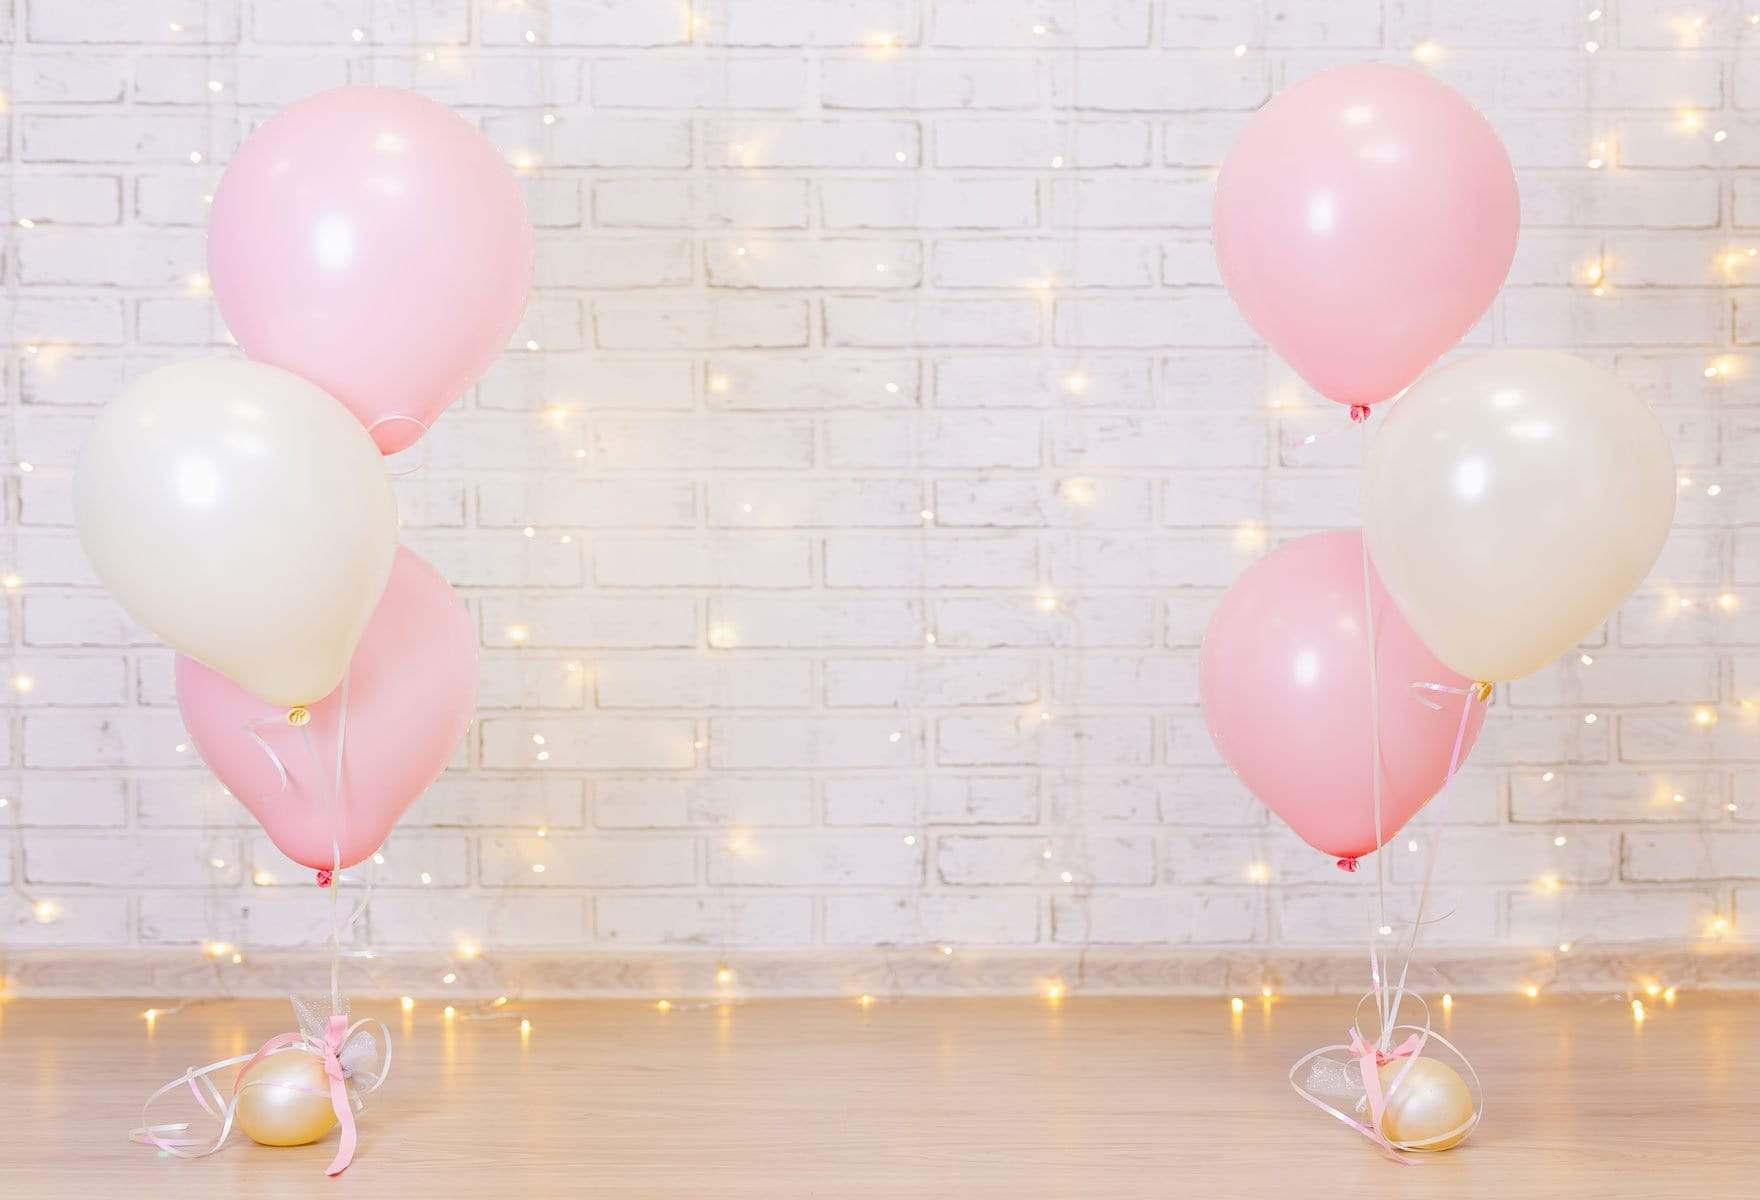 Kate White Brick Wall with Balloons and Decorations Birthday Backdrop for Photography